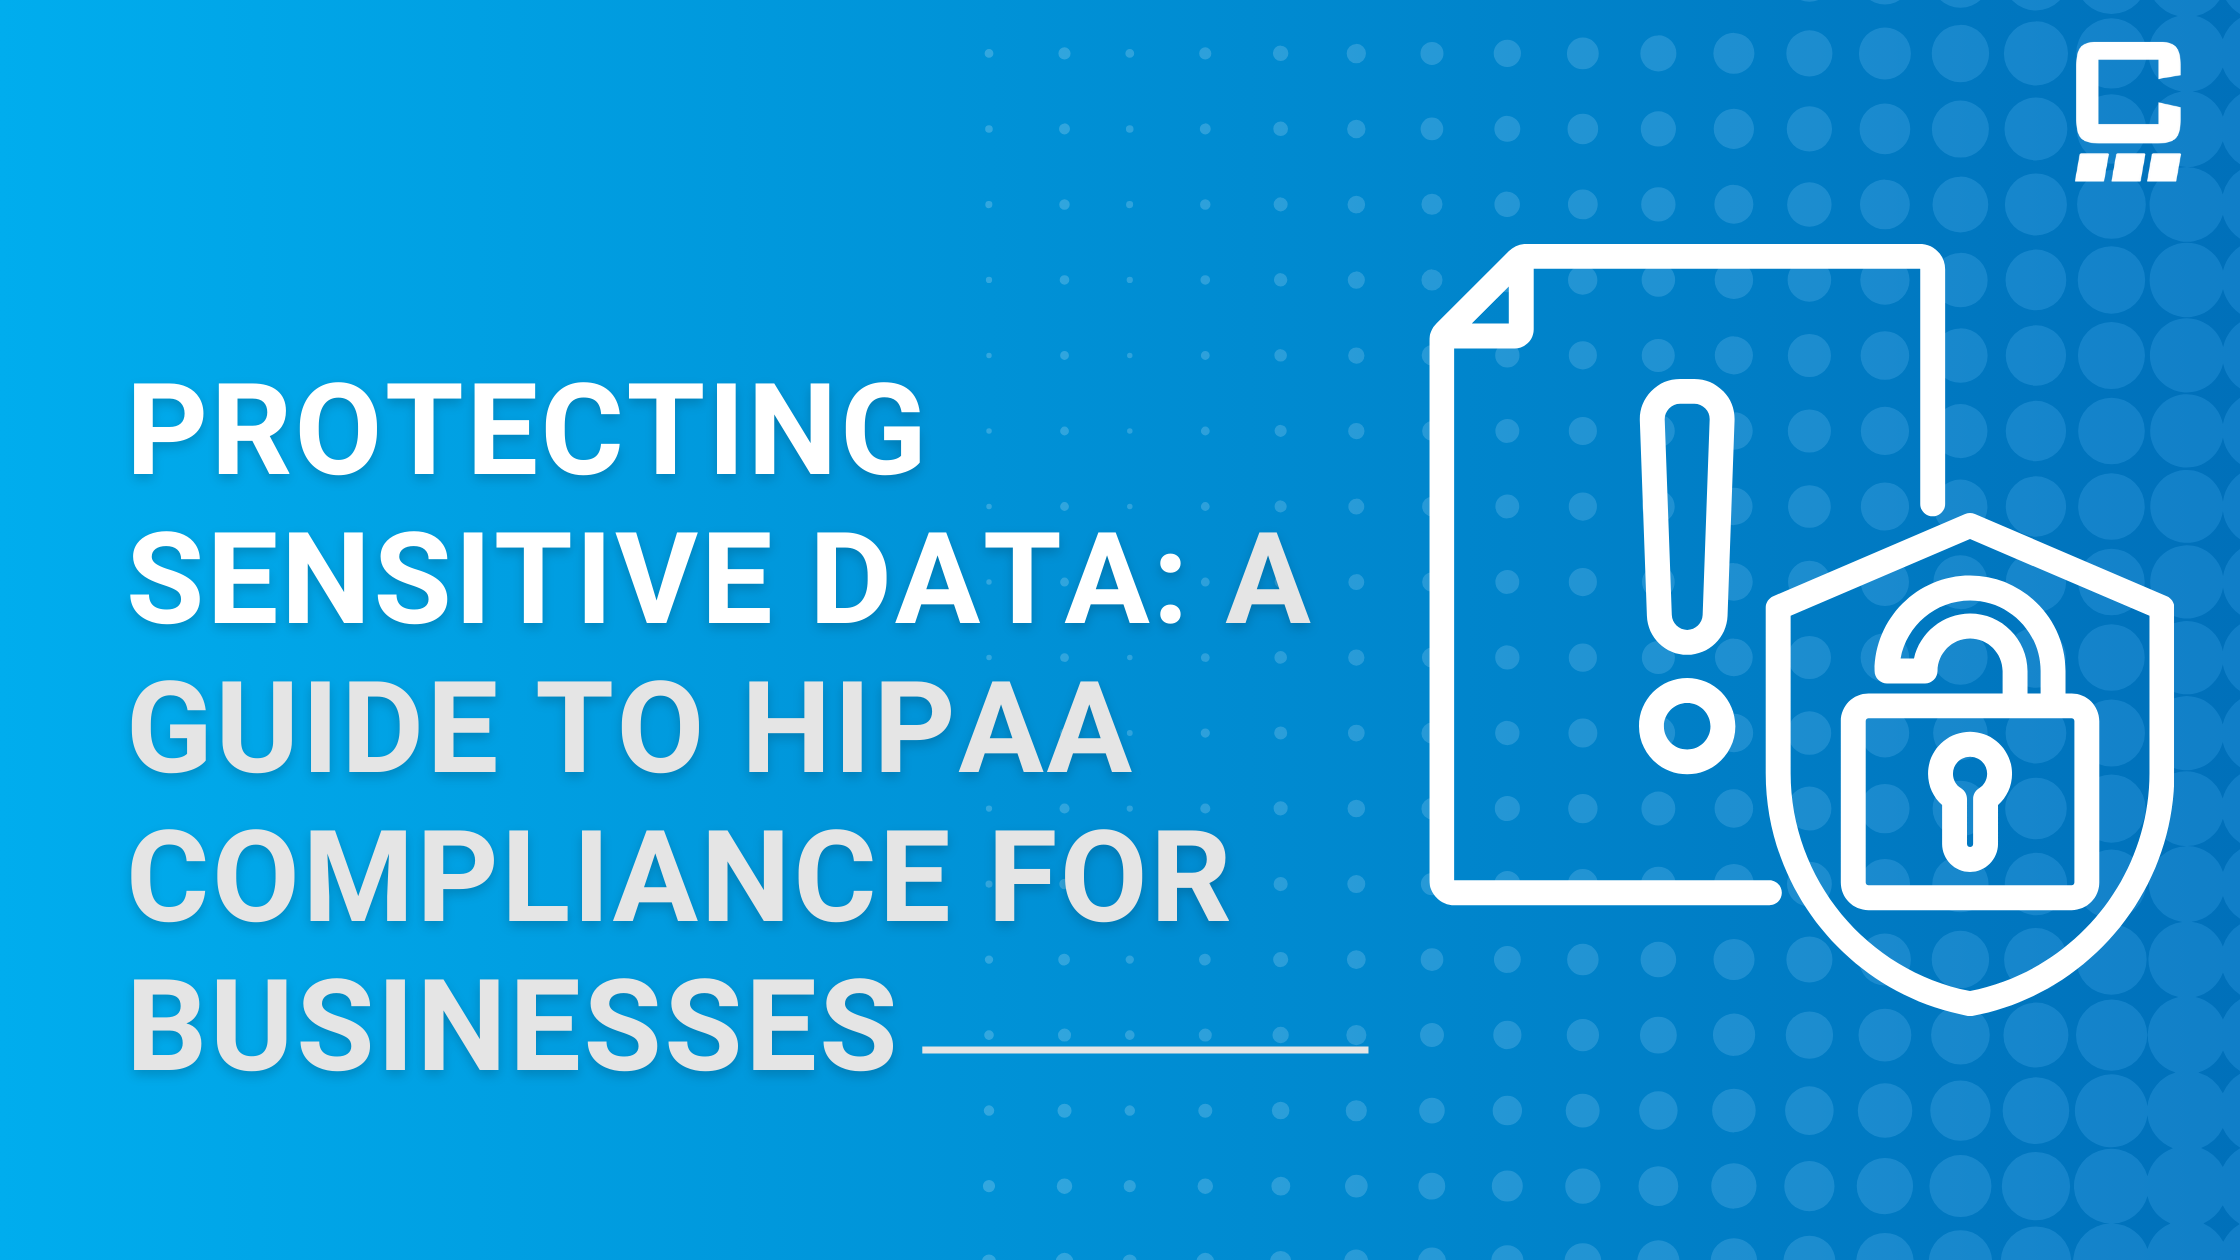 Protecting Sensitive Data: A Guide to HIPAA Compliance for Businesses